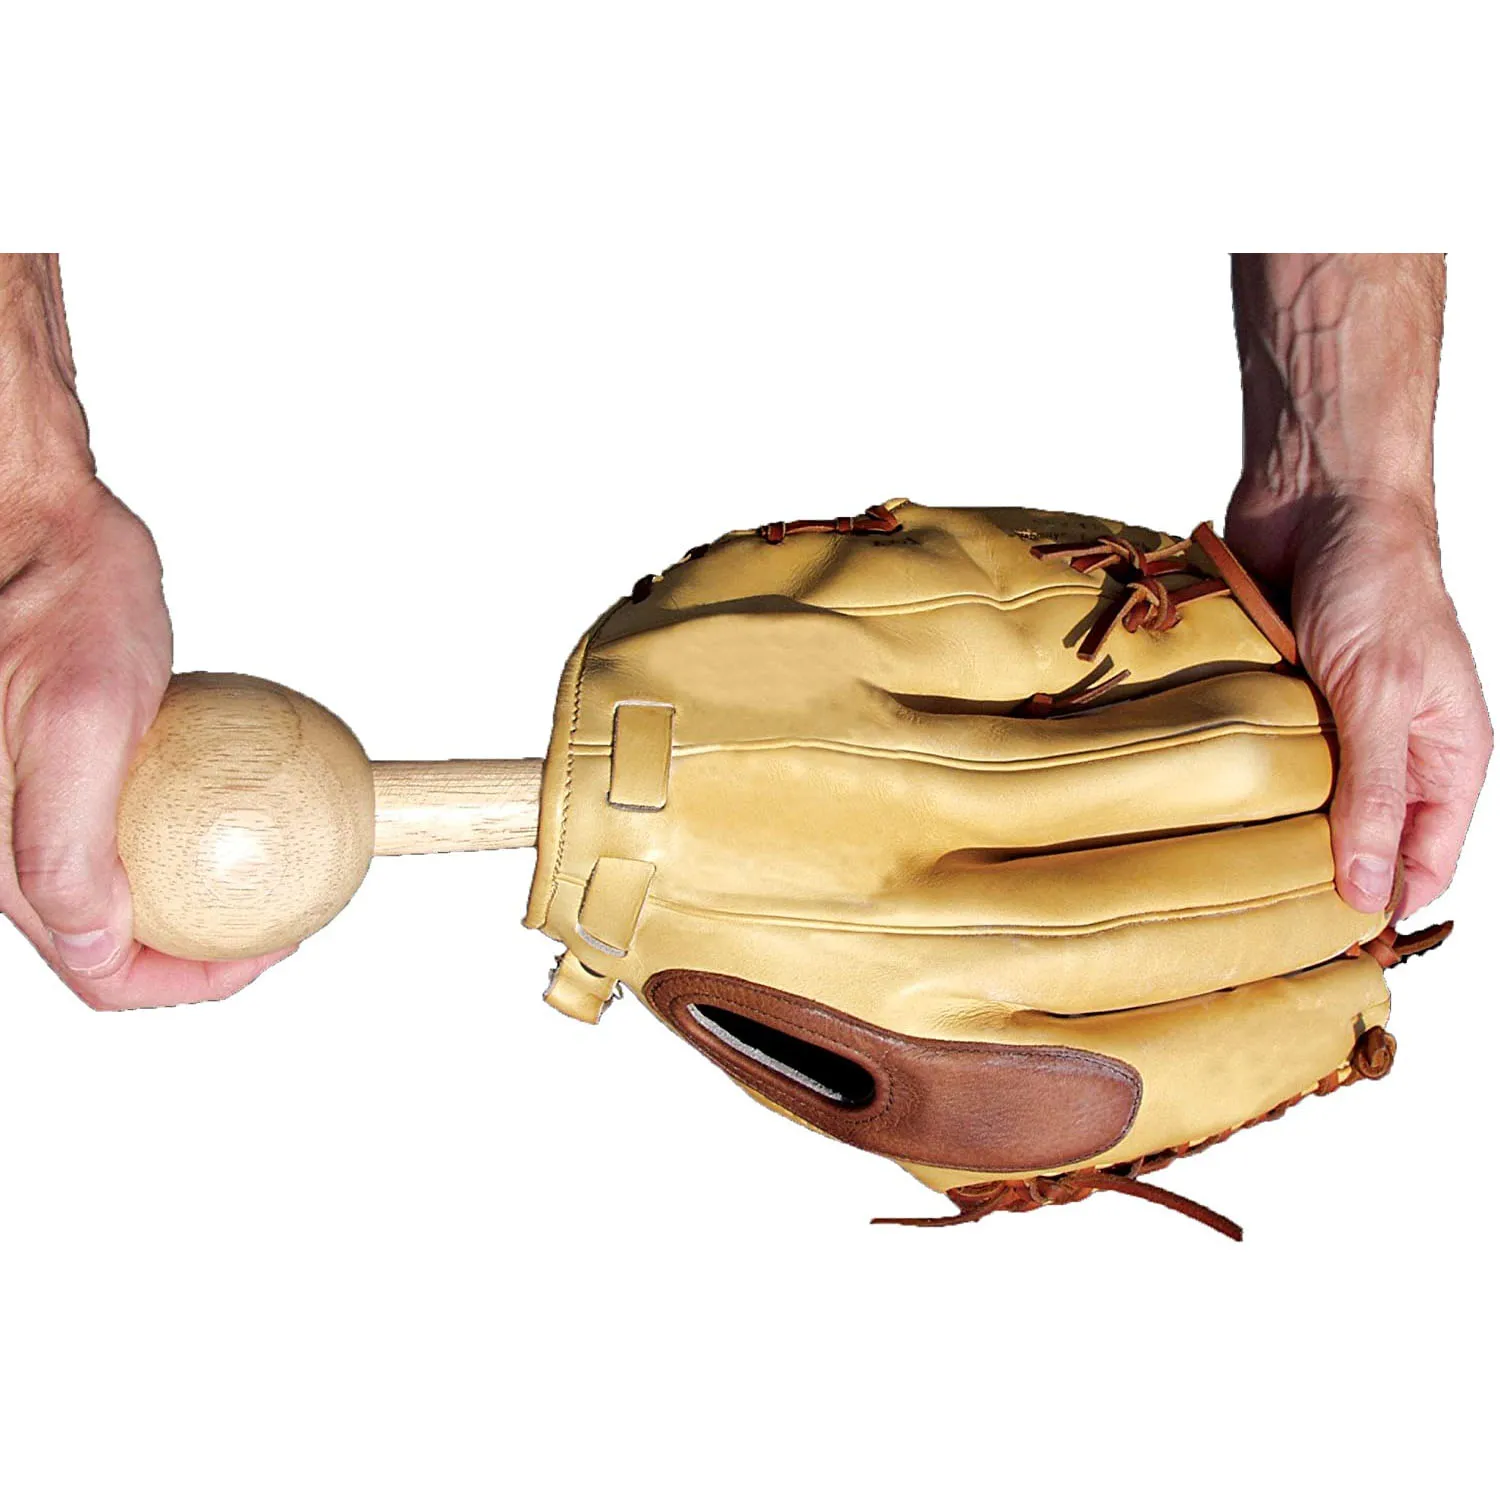 Solid wood Mallet for baseball glove Break-in and Shaping